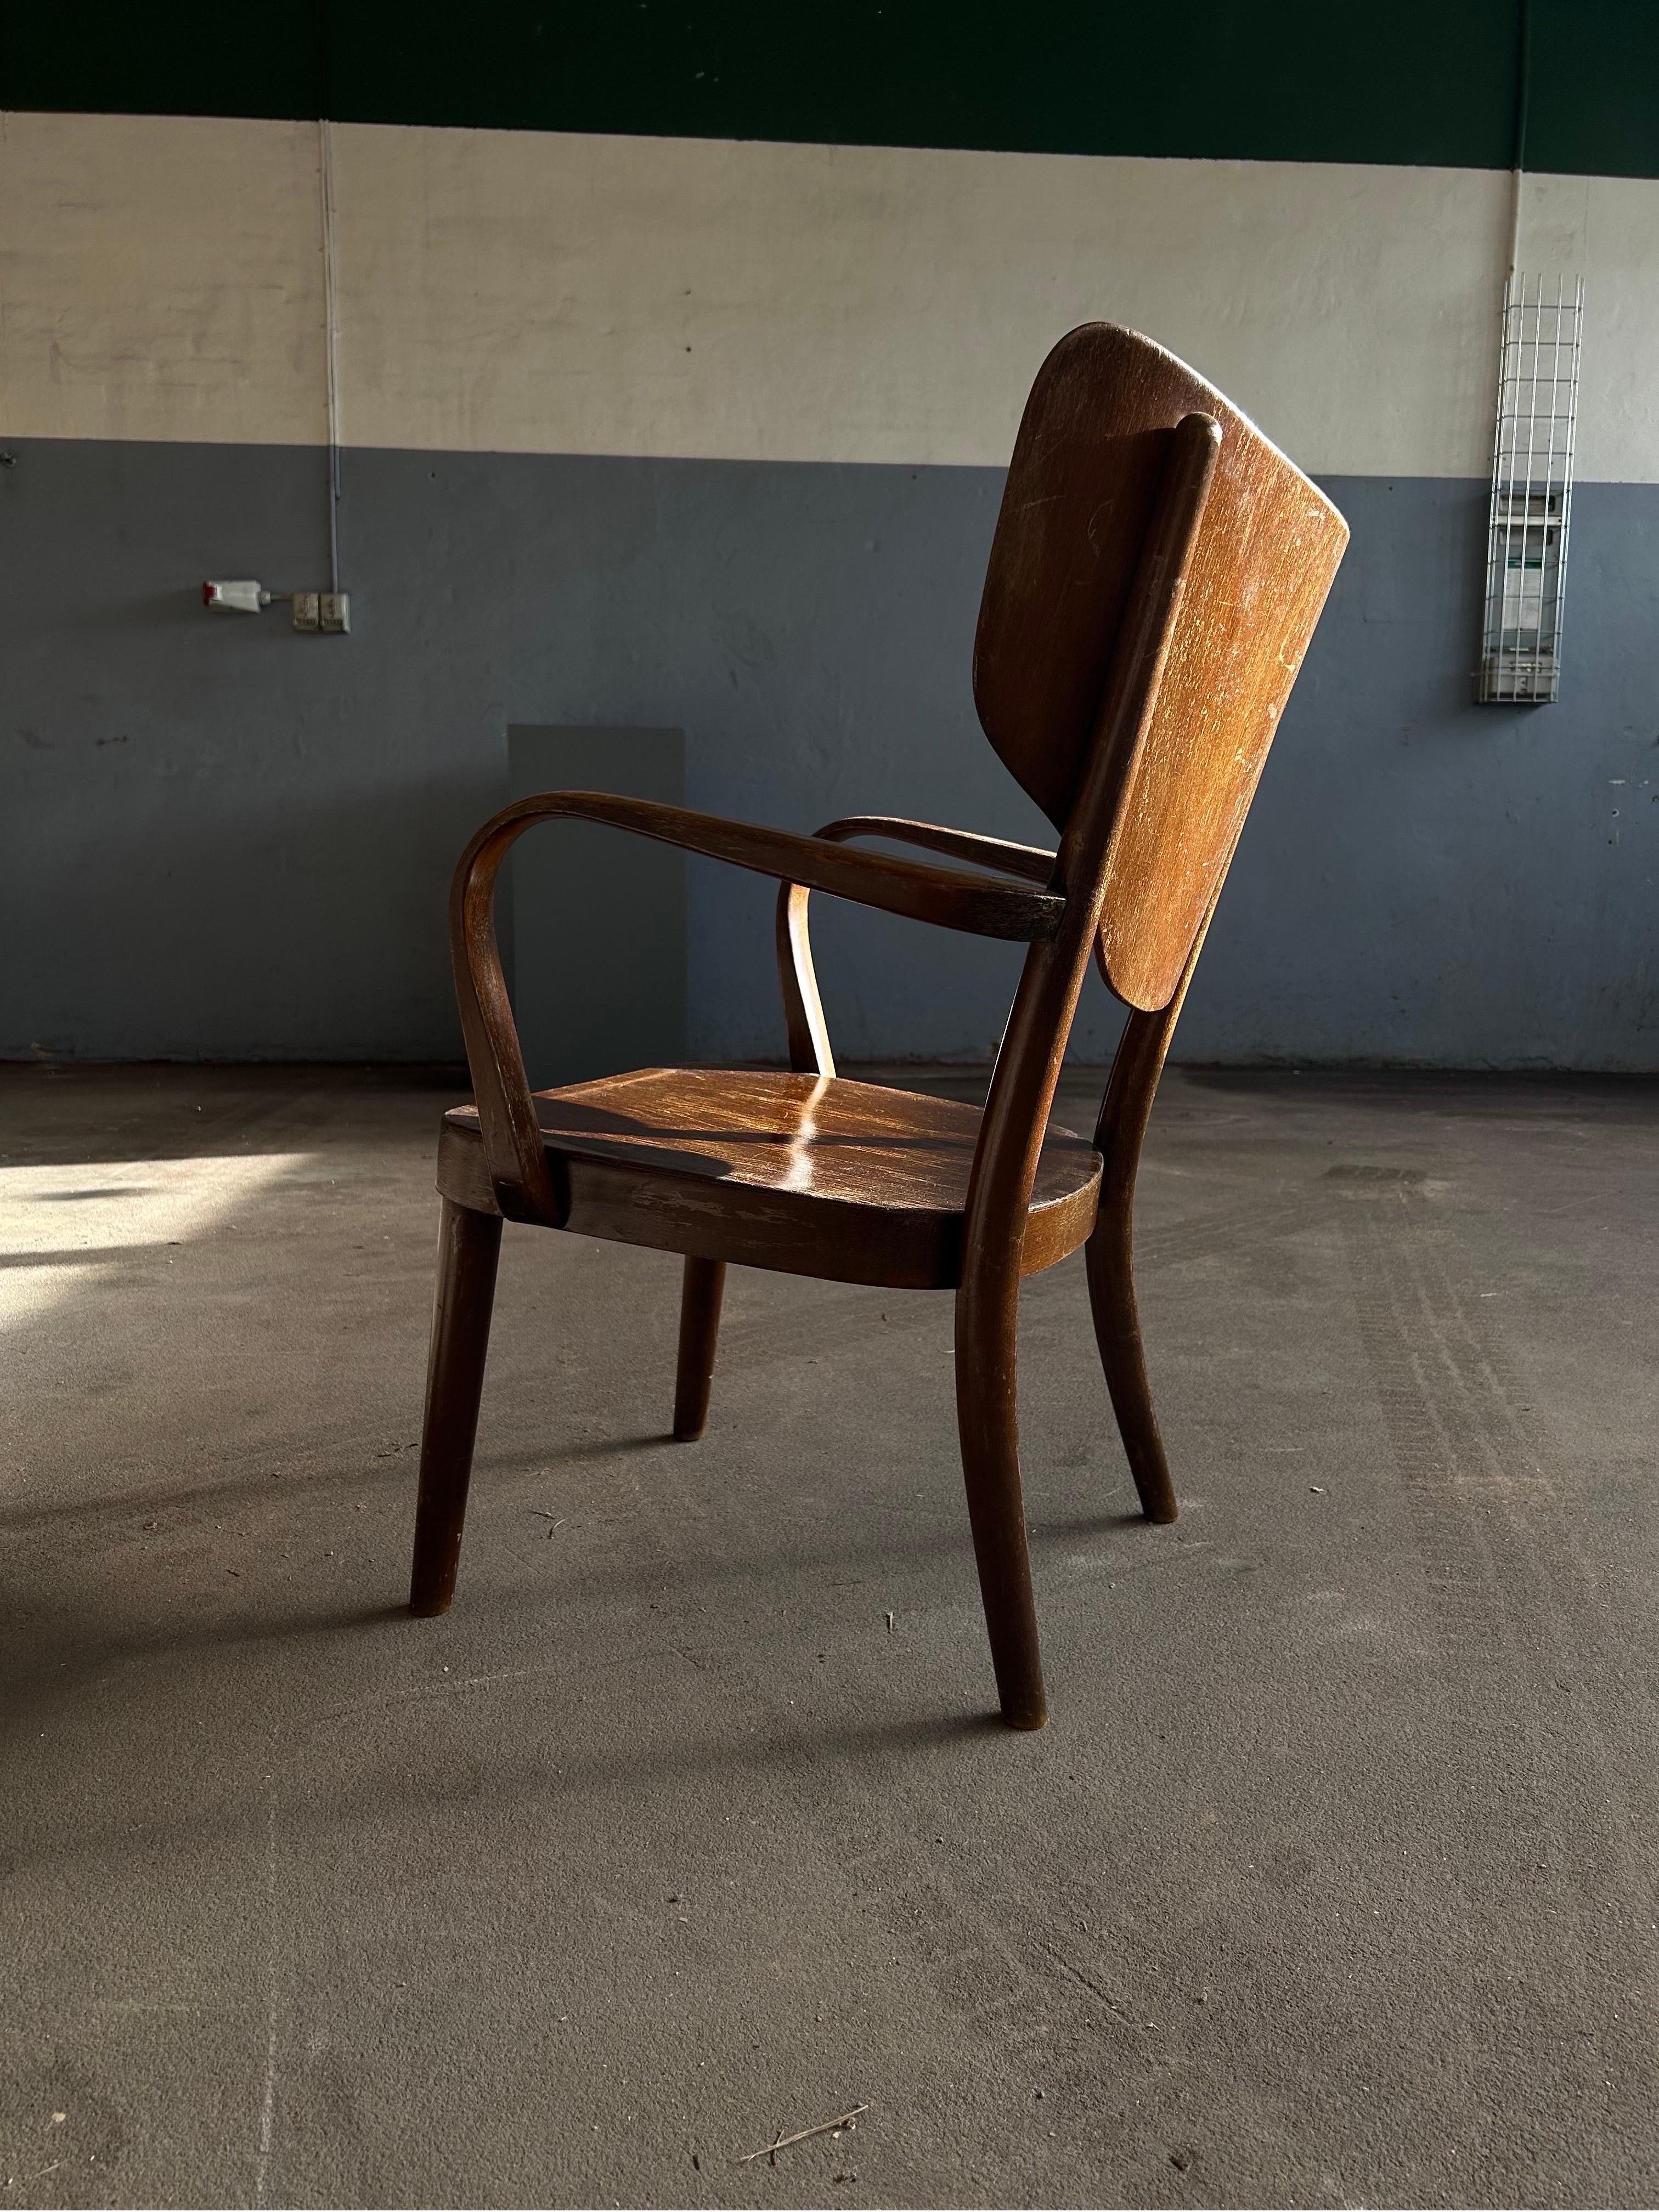 Rare Magnus Stephensen lounge chair in dark stained beechwood by Fritz Hansen in the 1940s.

The chair is in good condition with a beautiful patina and ready to be taking in use, the chair is the perfect detail to any interior and fits the typical